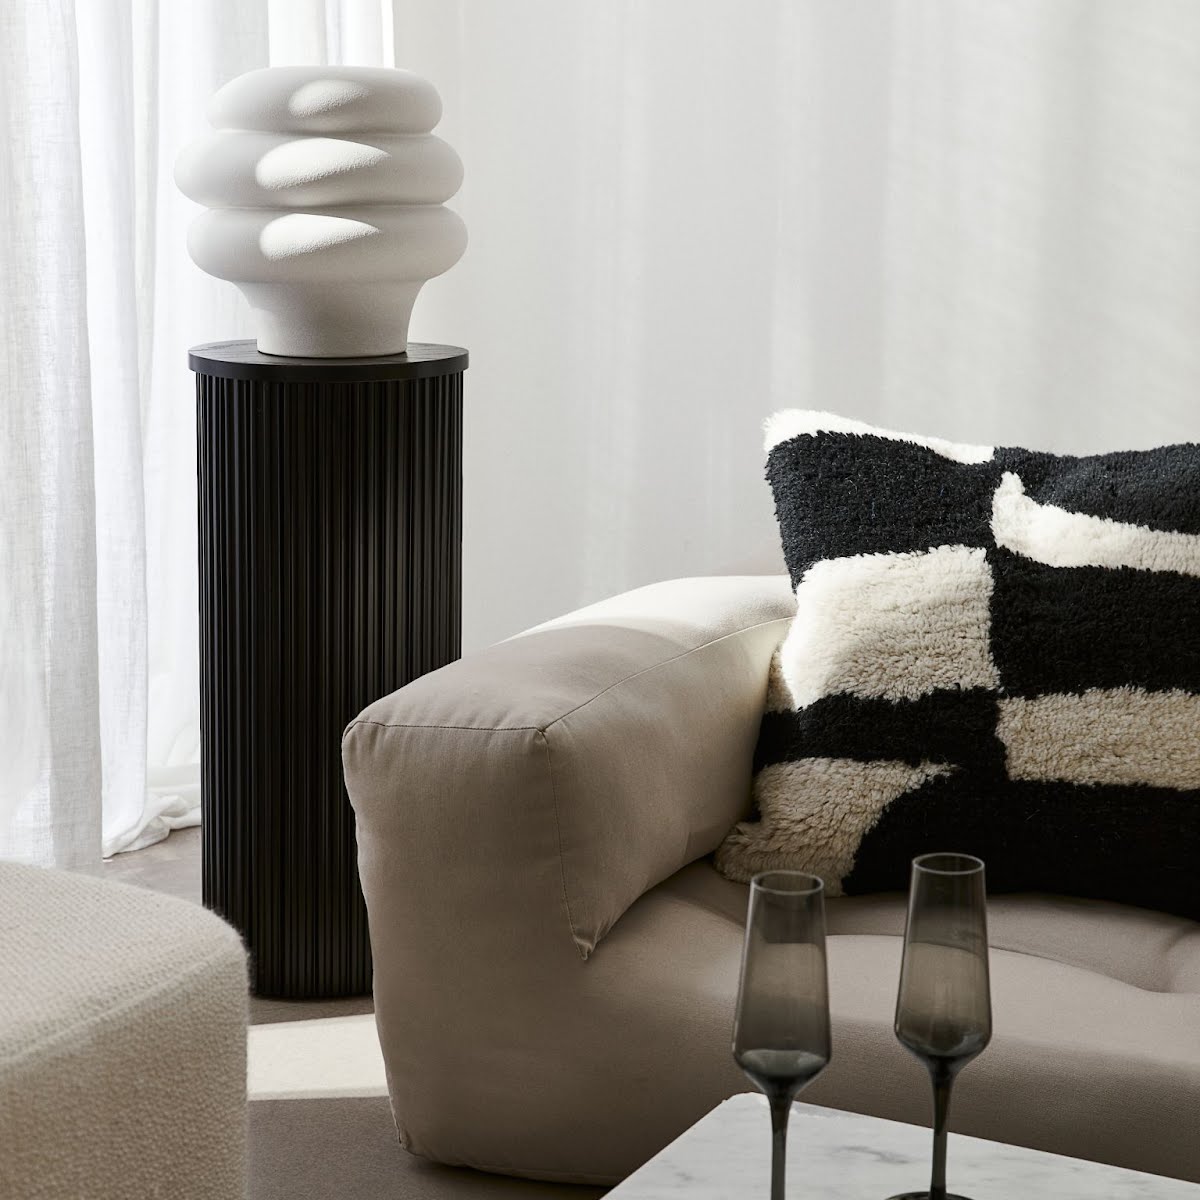 H&M Home Tufted Wool Cushion Cover, €34.99